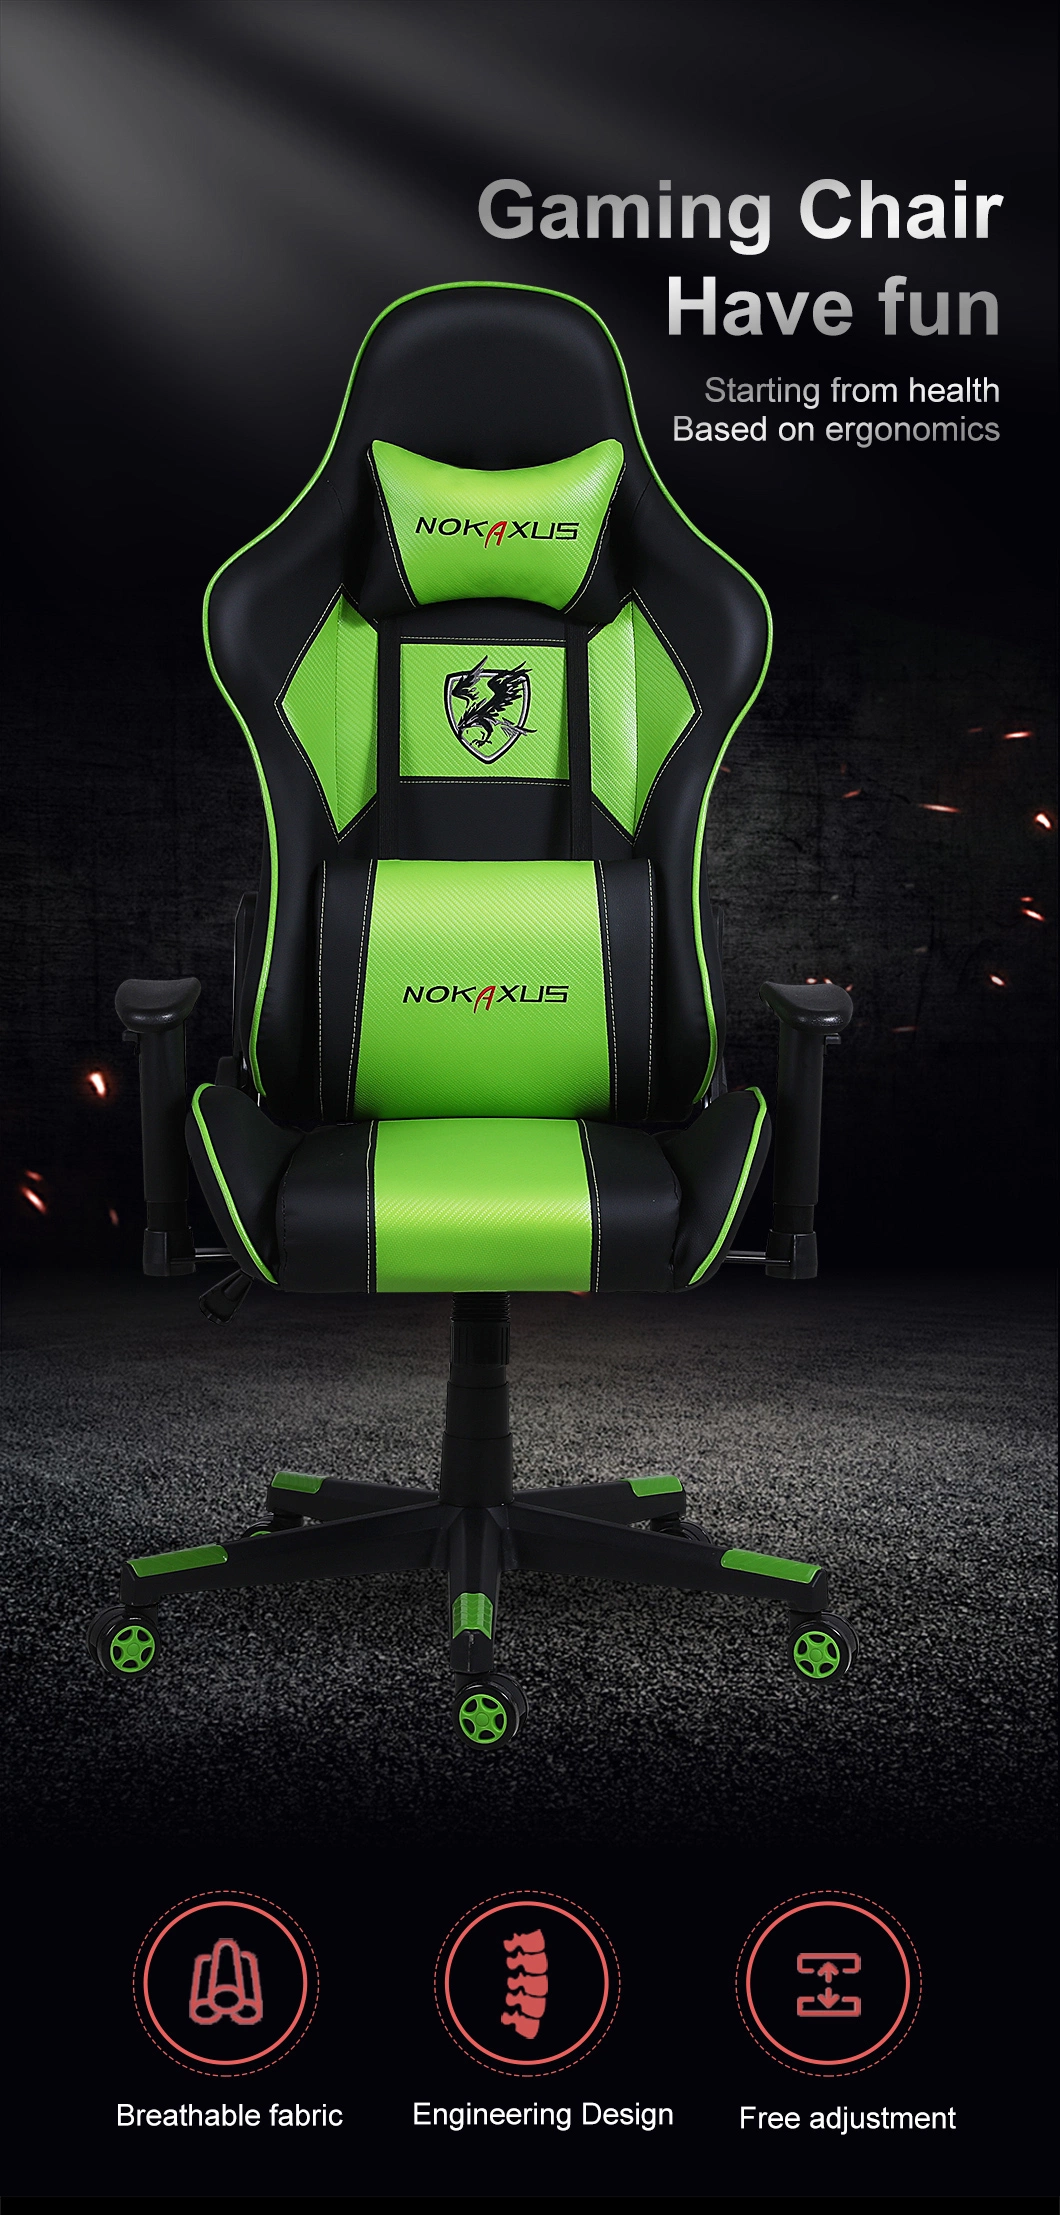 Dowinx Office Furniture PU/PVC Leather Custom Logo Gaming Chairs Gamer Chair Office Chair